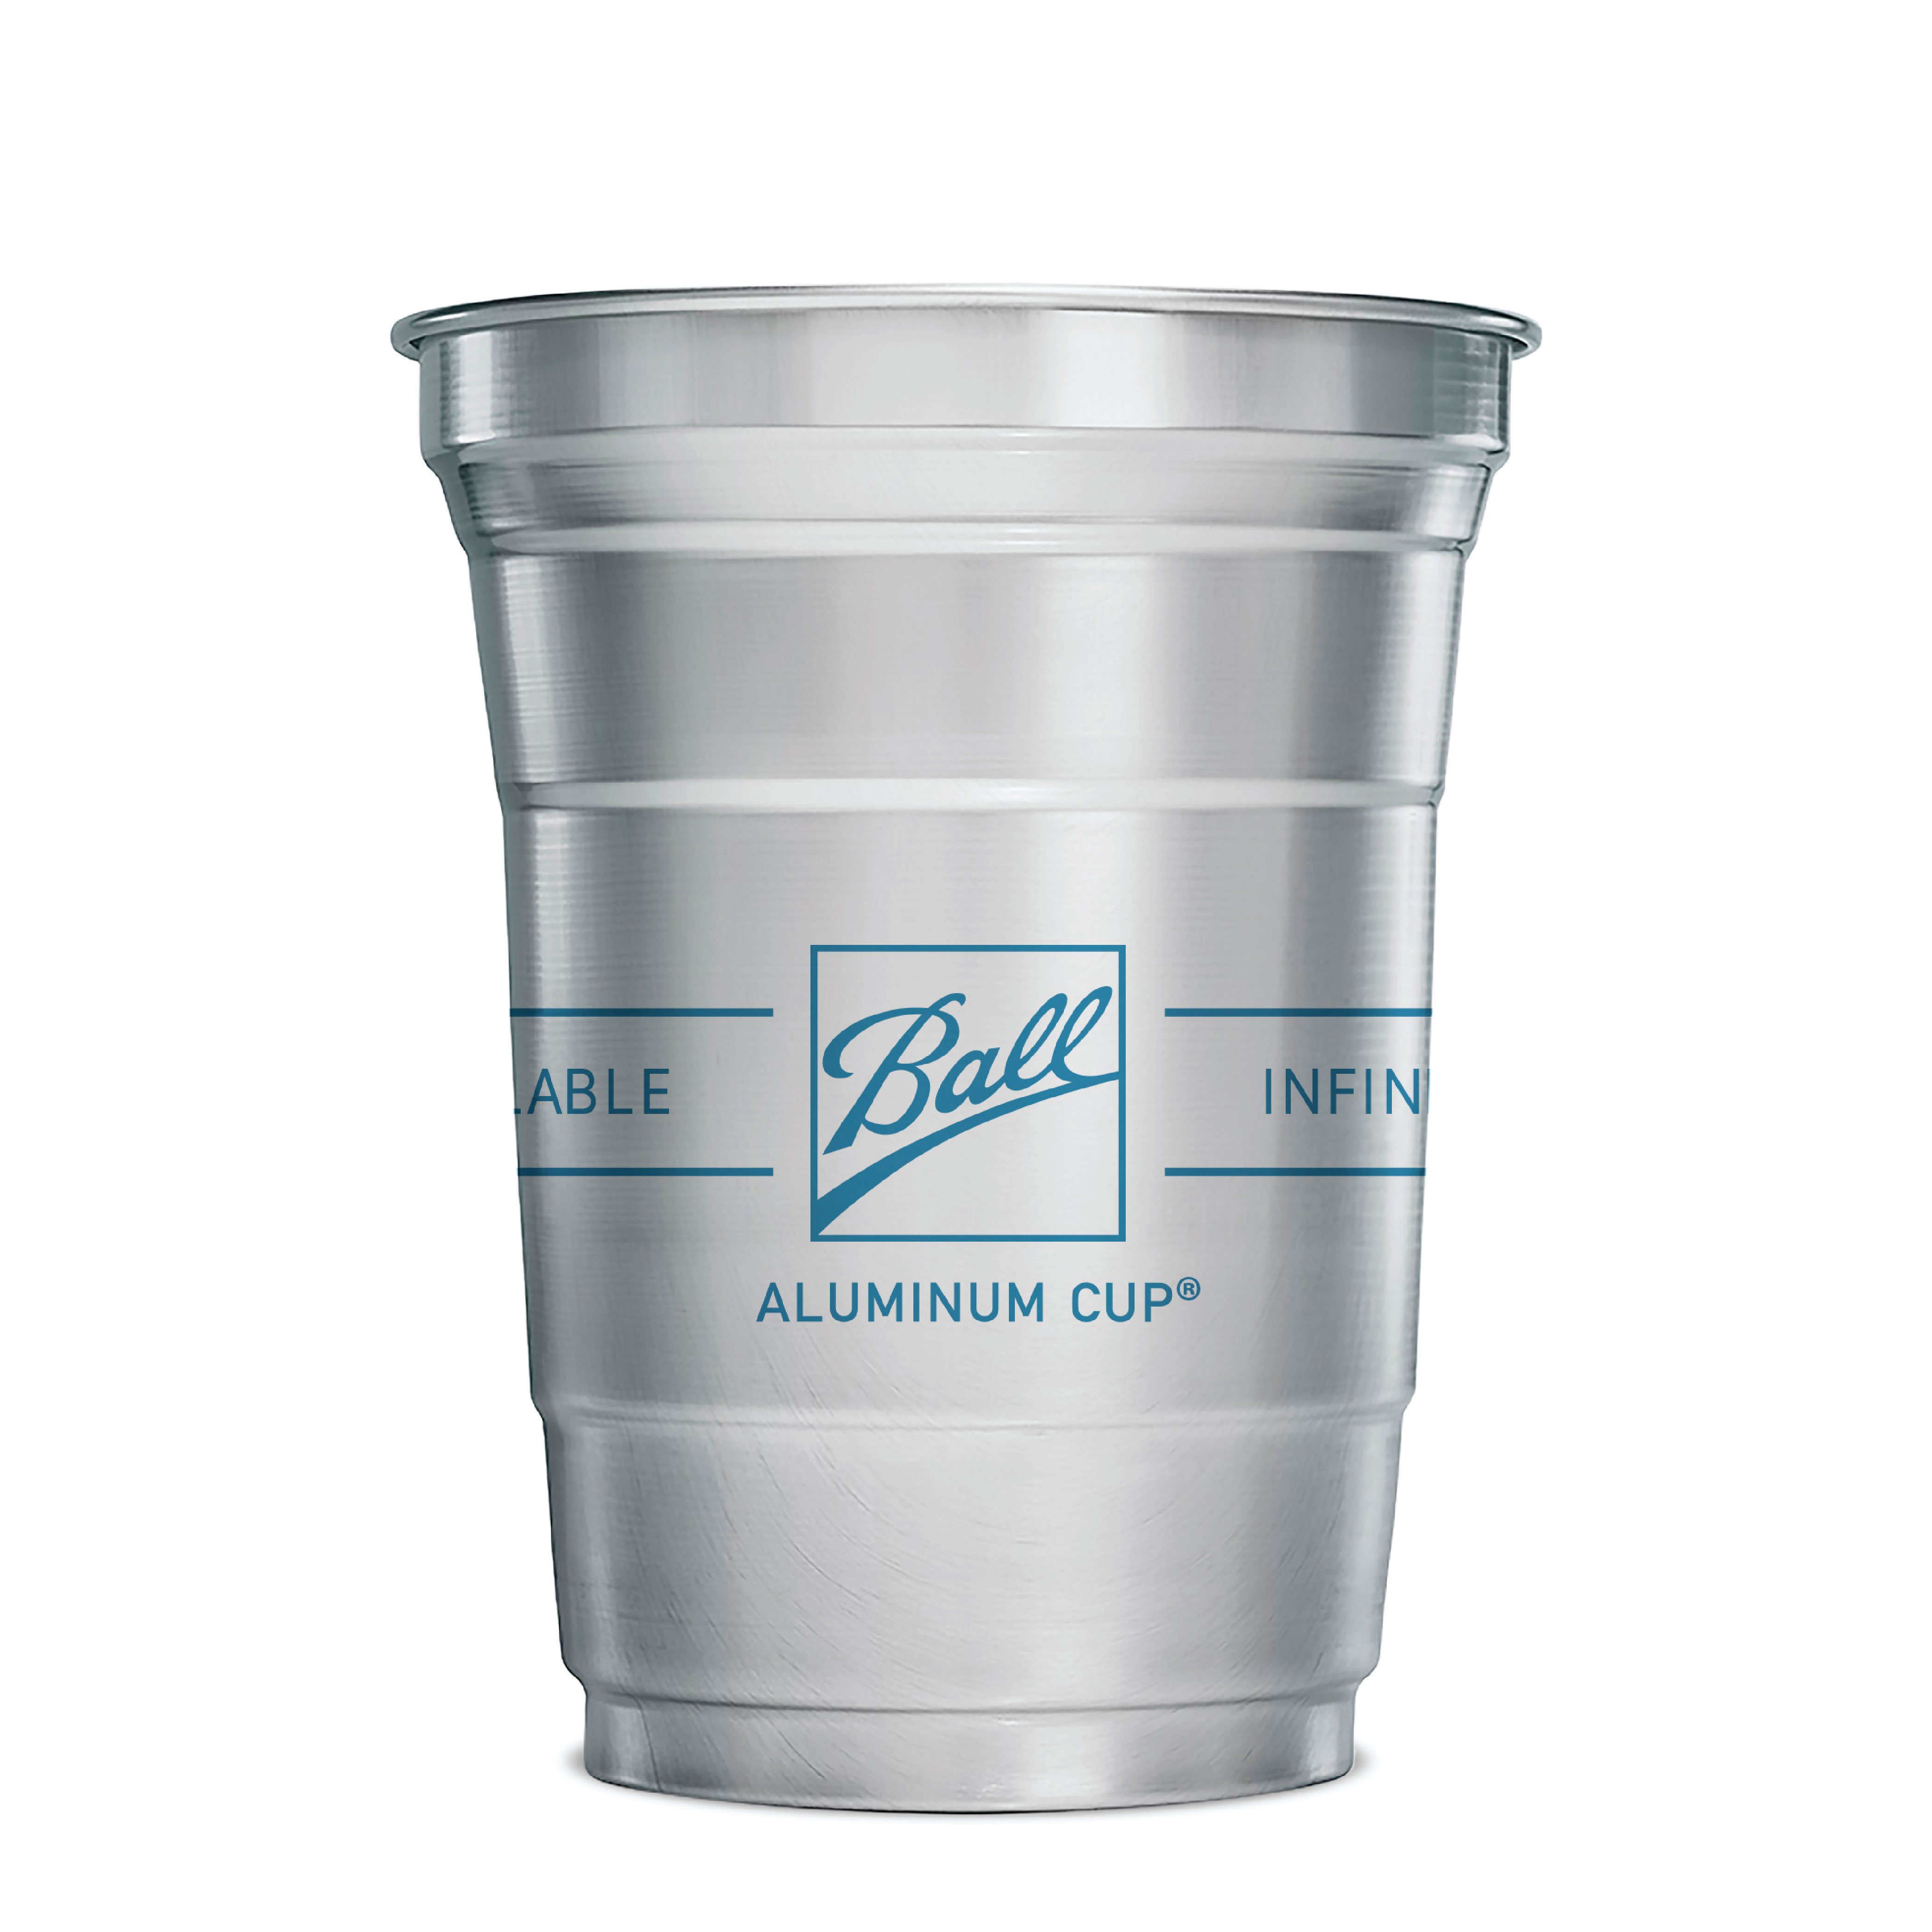 Zelbeez Chill Aluminum Cups, Dishwasher Safe, 16 oz. Color Coated Cups,  100% Recyclable Aluminum Cup…See more Zelbeez Chill Aluminum Cups,  Dishwasher